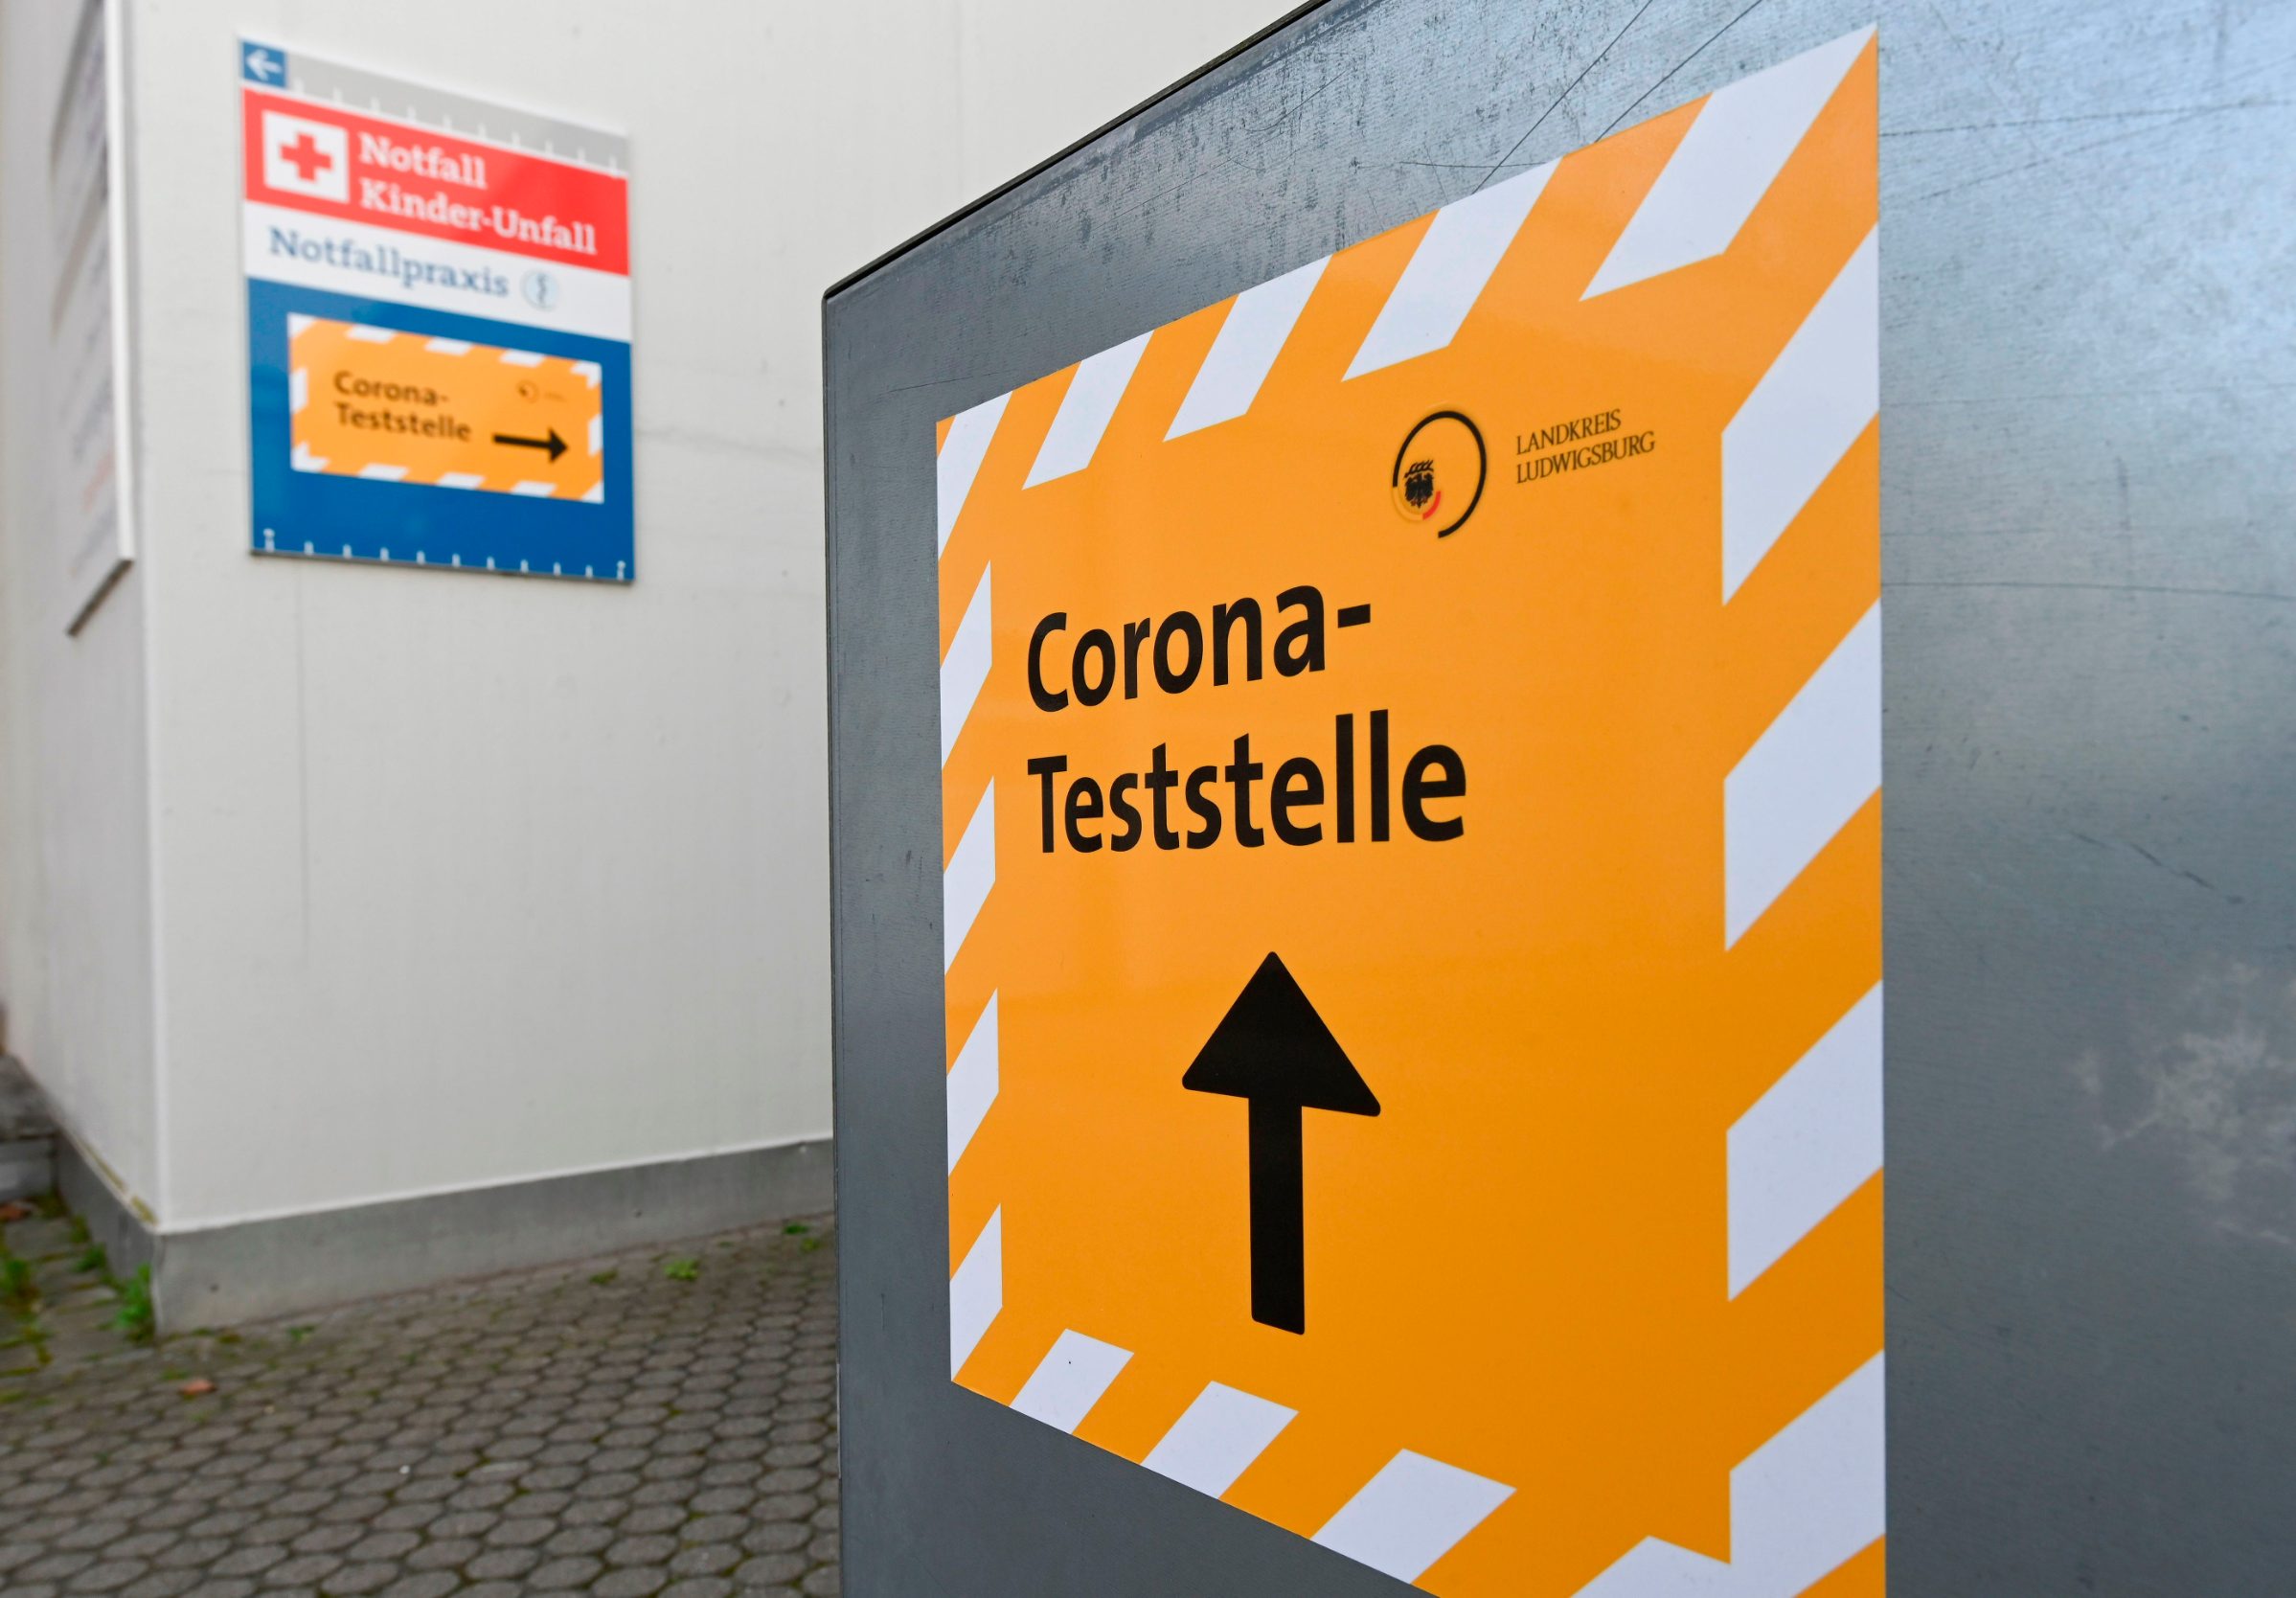 A sign shows the way to the corona test center at the hospital facilities Ludwigsburg in Ludwigsburg, southern Germany, on March 14, 2020. (Photo by THOMAS KIENZLE / AFP)